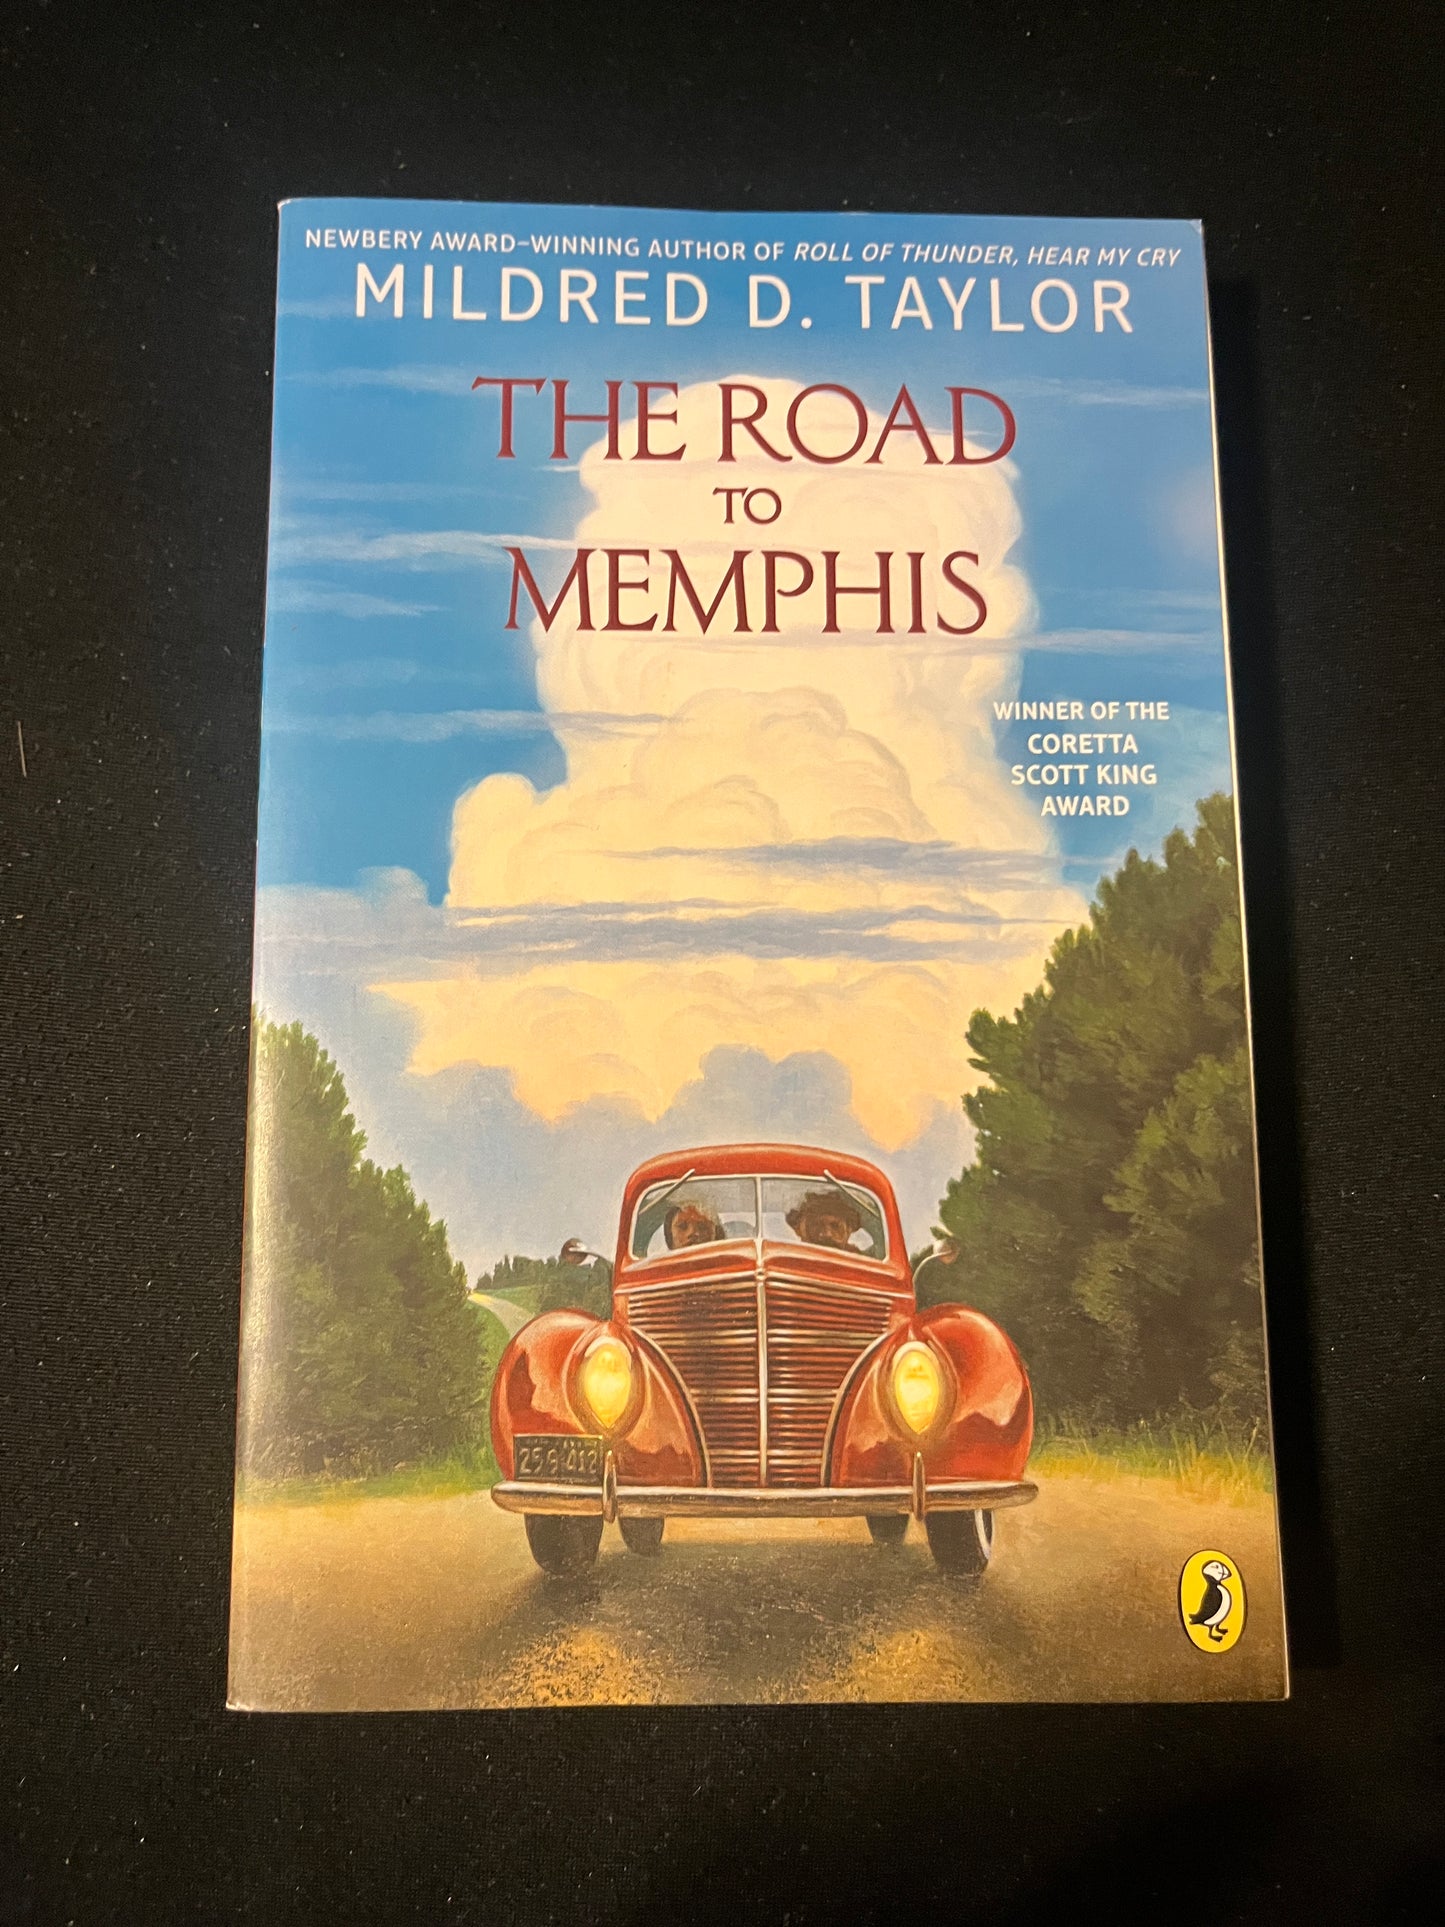 THE ROAD TO MEMPHIS by Mildred D. Taylor